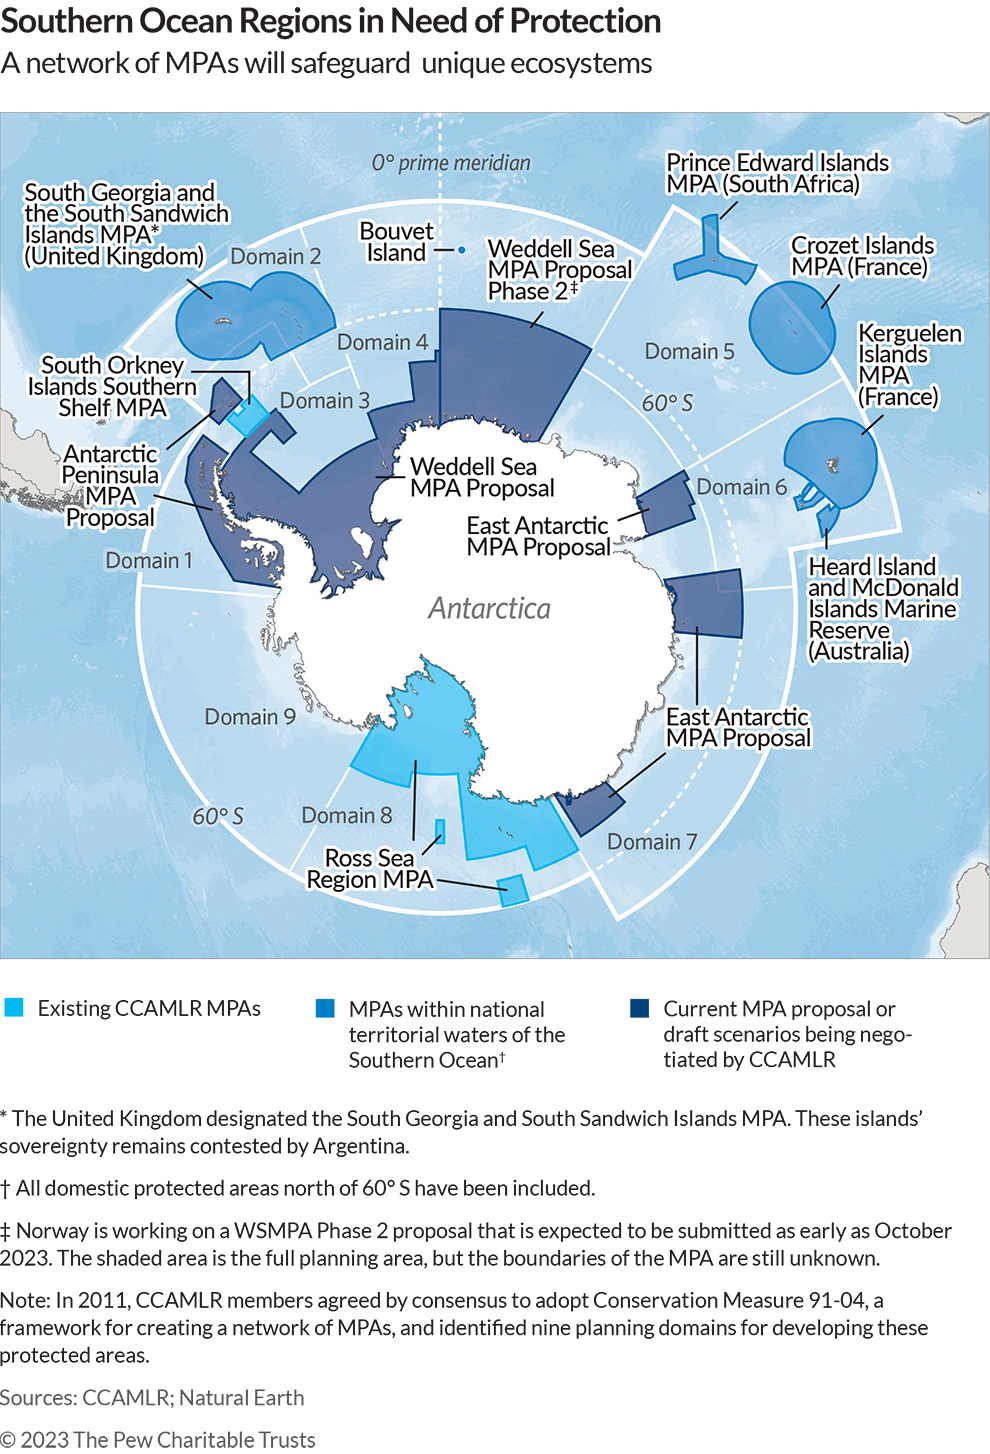 Existing and proposed marine protected areas of Antarctica. Image courtesy of Pew Bertarelli Ocean Legacy Project.